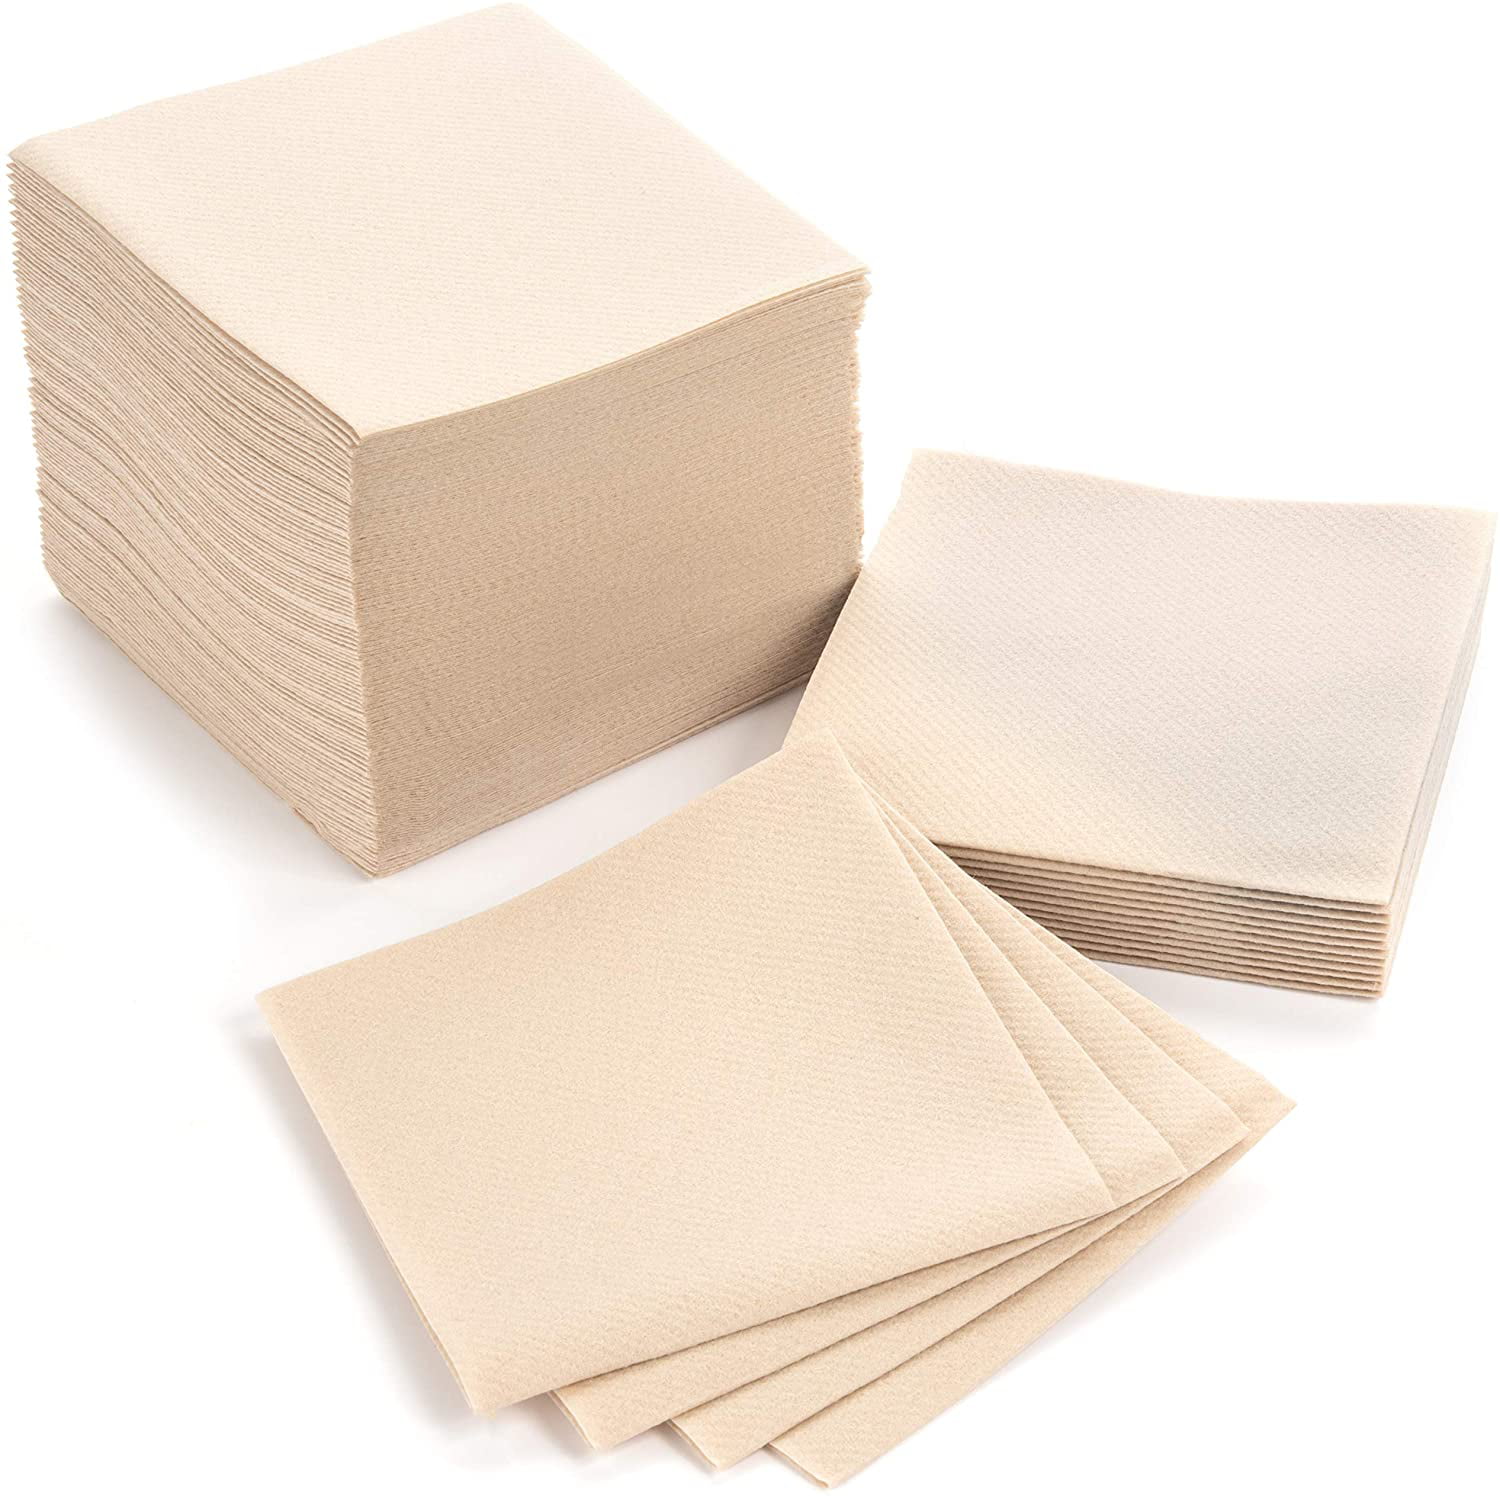 Natural Disposable Cocktail Party Linen Feel Napkins 9”x9” Large Eco-Friendly Recycled Paper Towels Luxury Linen Like Beverage Napkins 100-Pack Top Quality Party Supplies Absorbent & Soft 